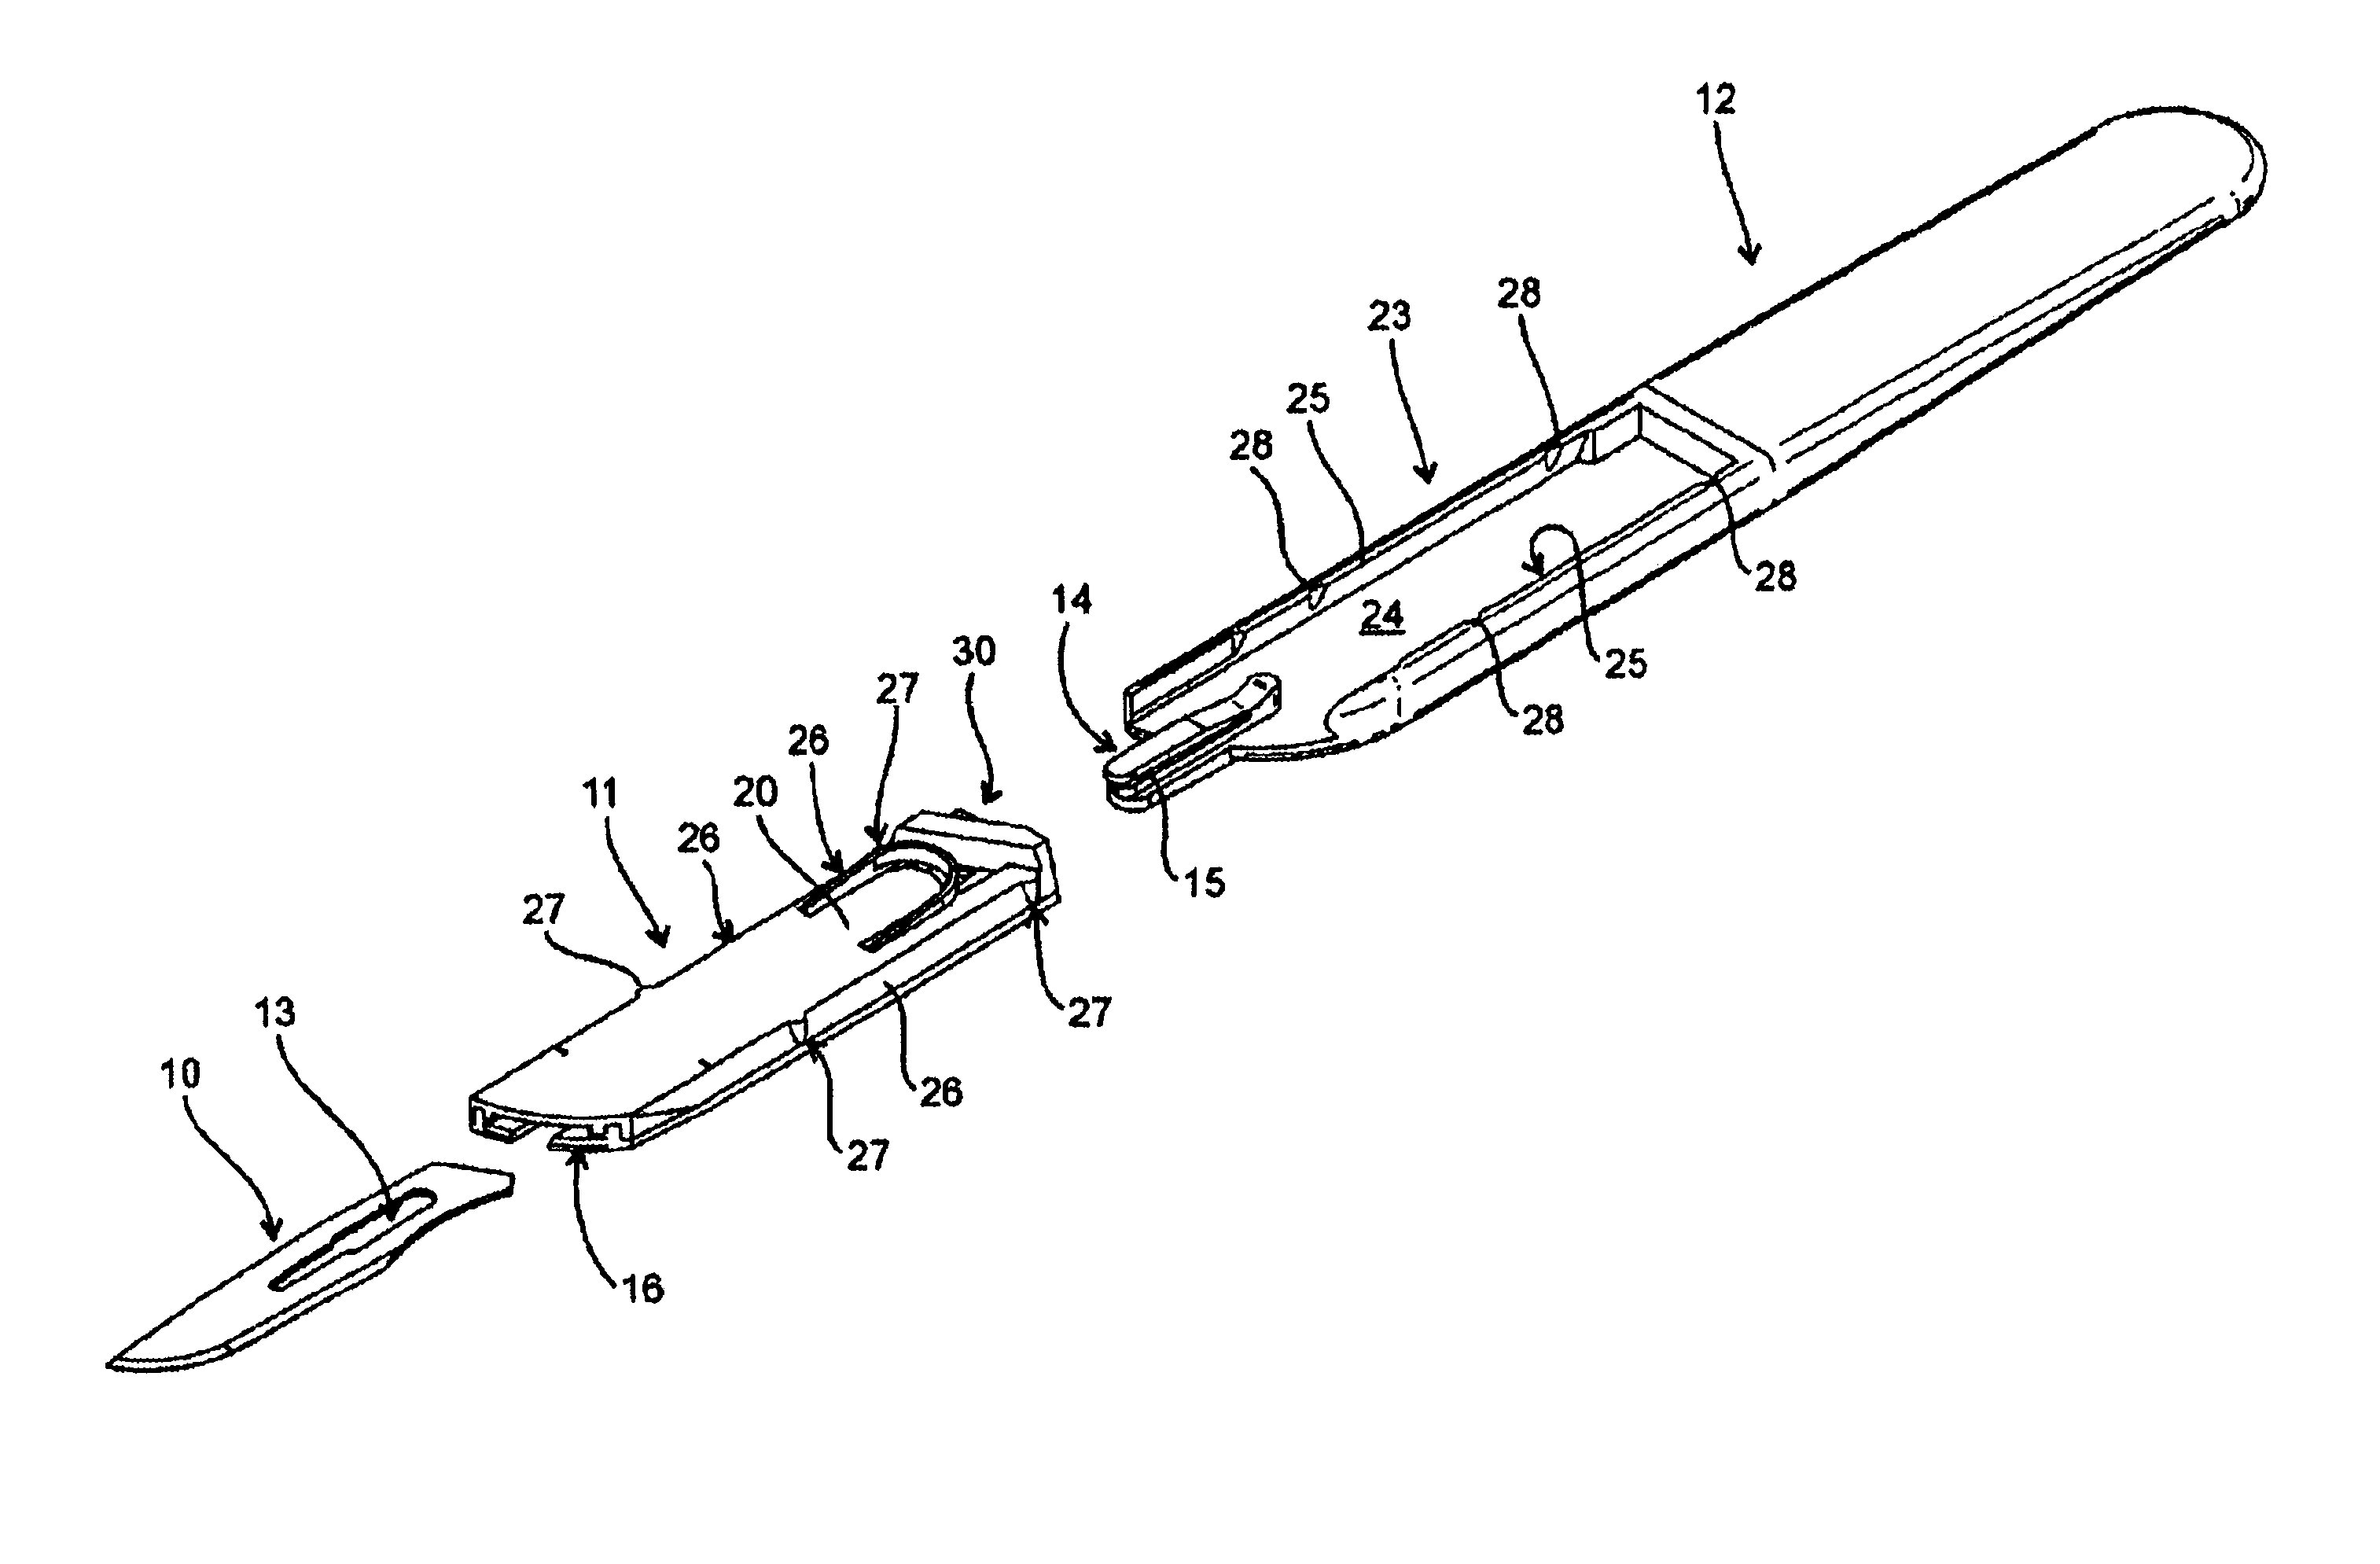 Surgical scalpel with retractable guard